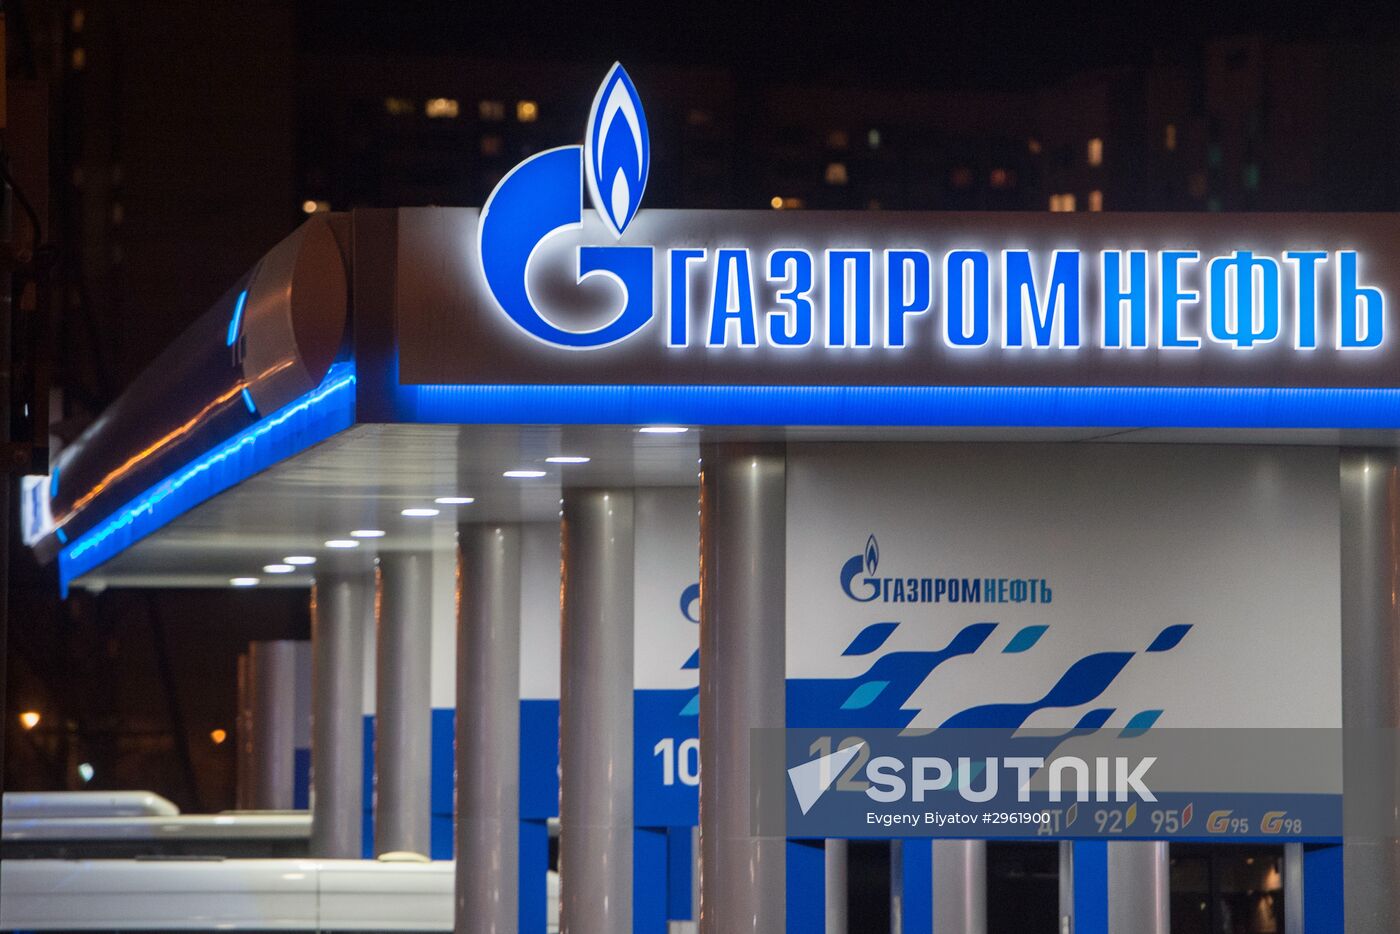 Gazprom Neft gas station in Moscow